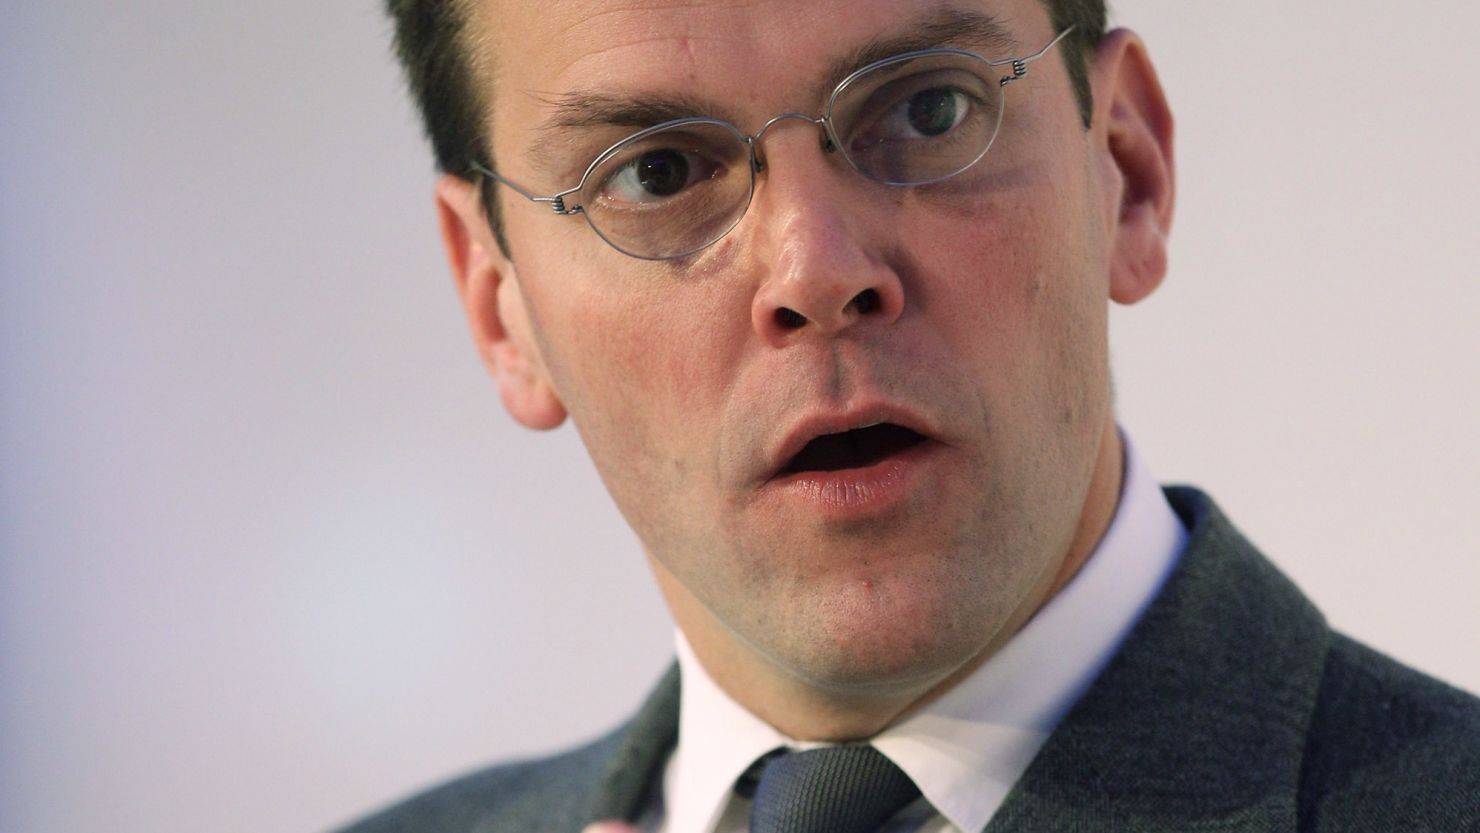 Until the hacking scandal James Murdoch was the presumed heir to father Rupert's media empire.